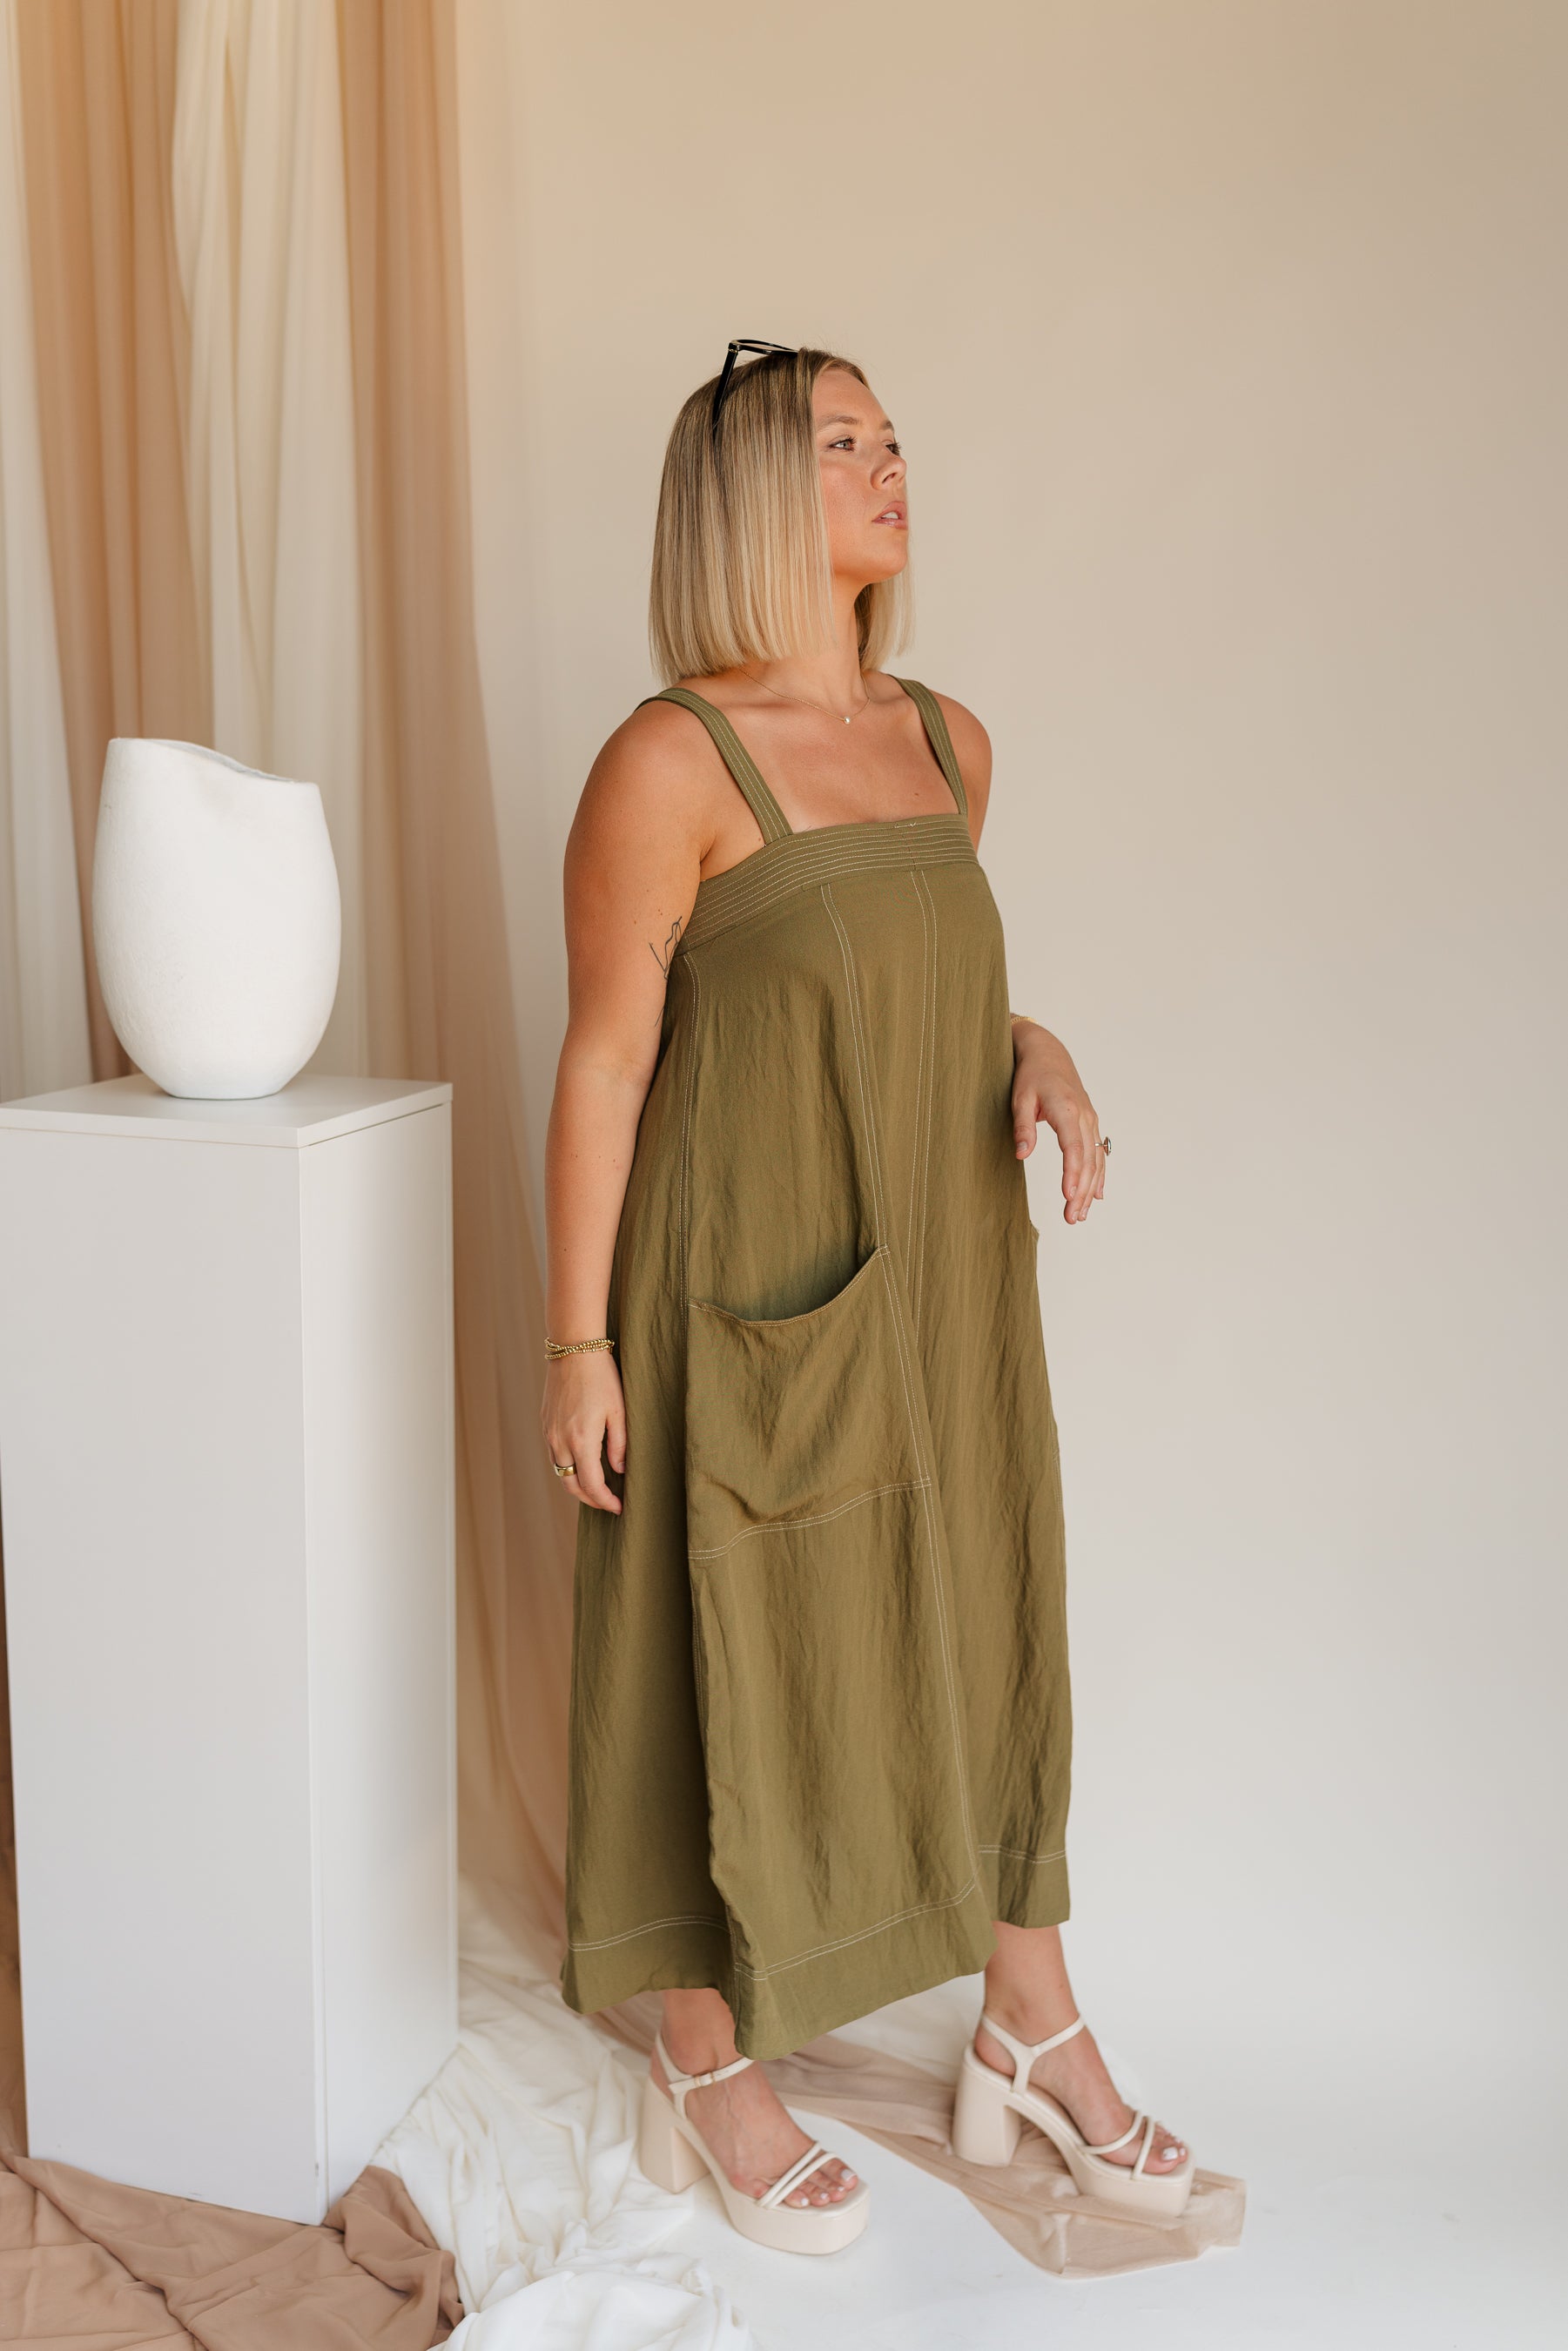 Side view of model wearing Melanie Olive Midi Dress. This is an olive midi dress, with white stitch details, midi length, pockets, and adjustable straps.